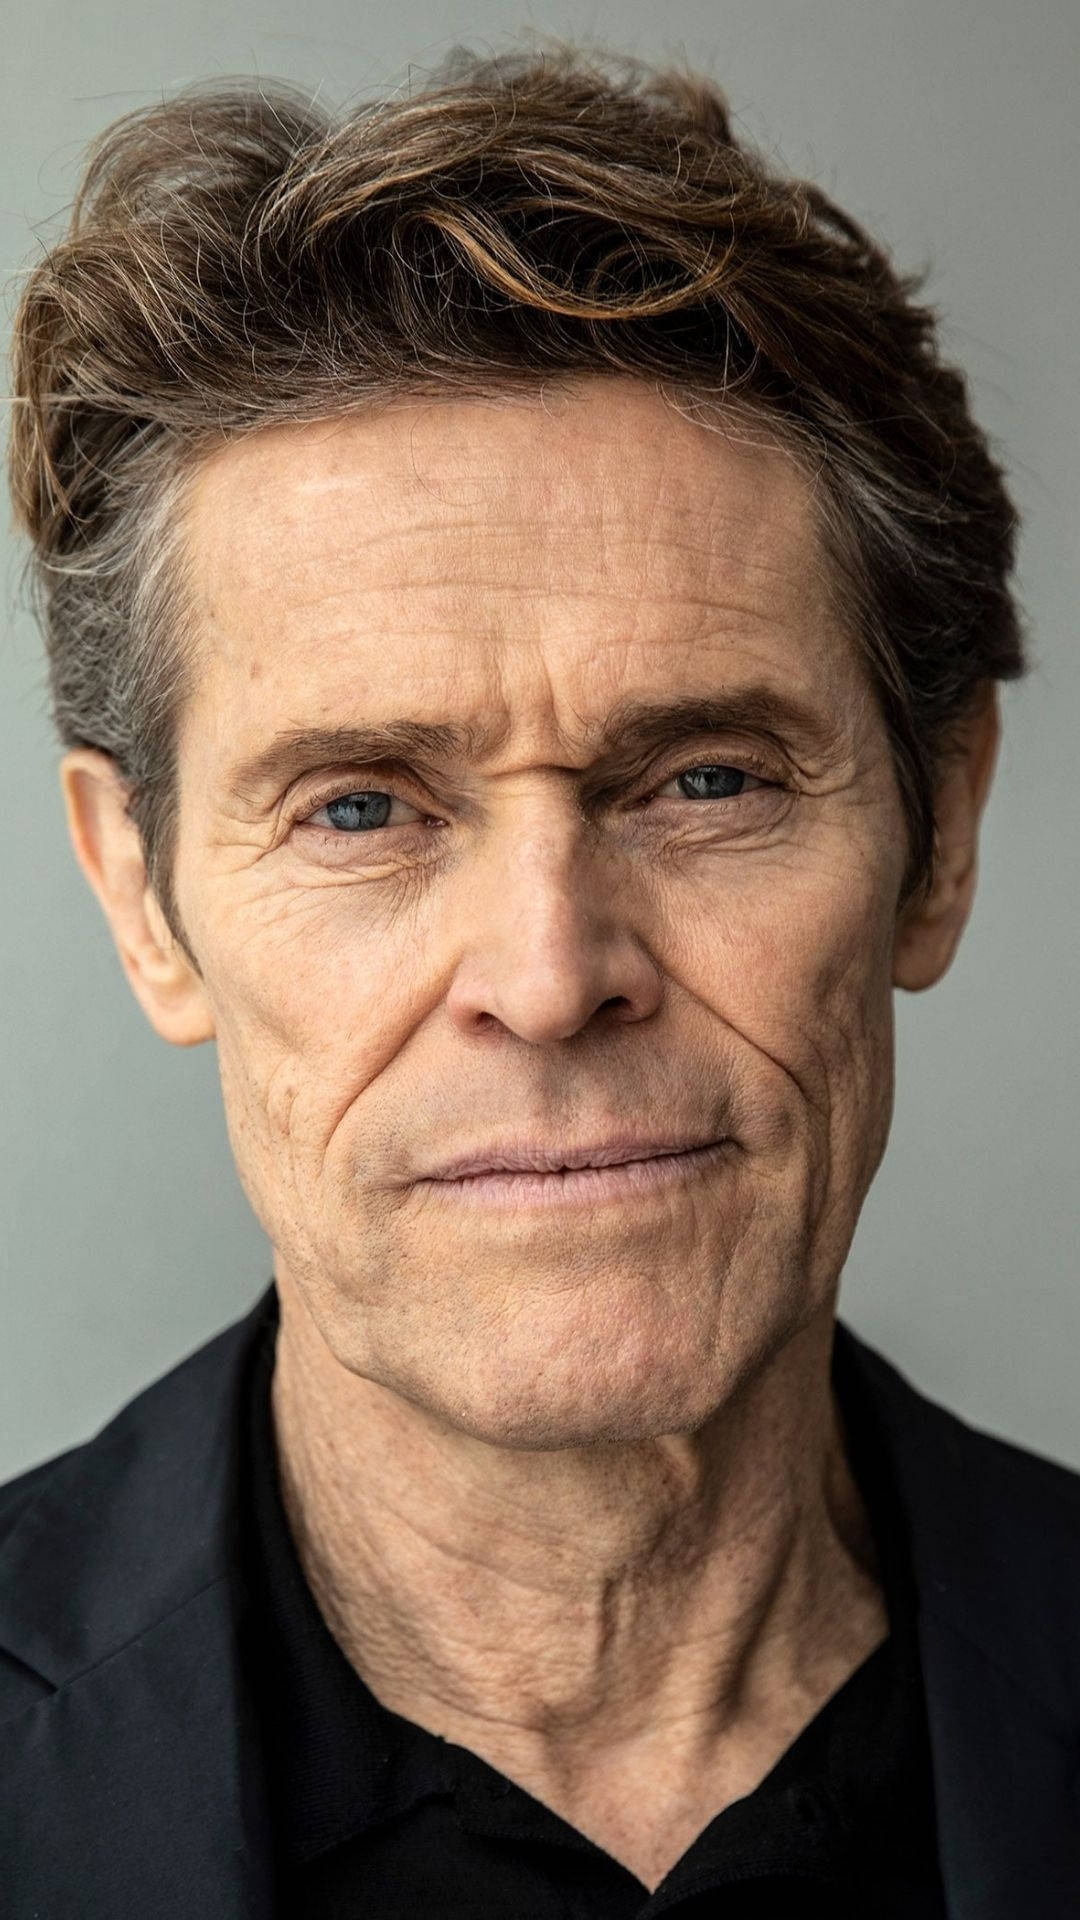 Acclaimed Actor Willem Dafoe In A Close-up Portrait Background